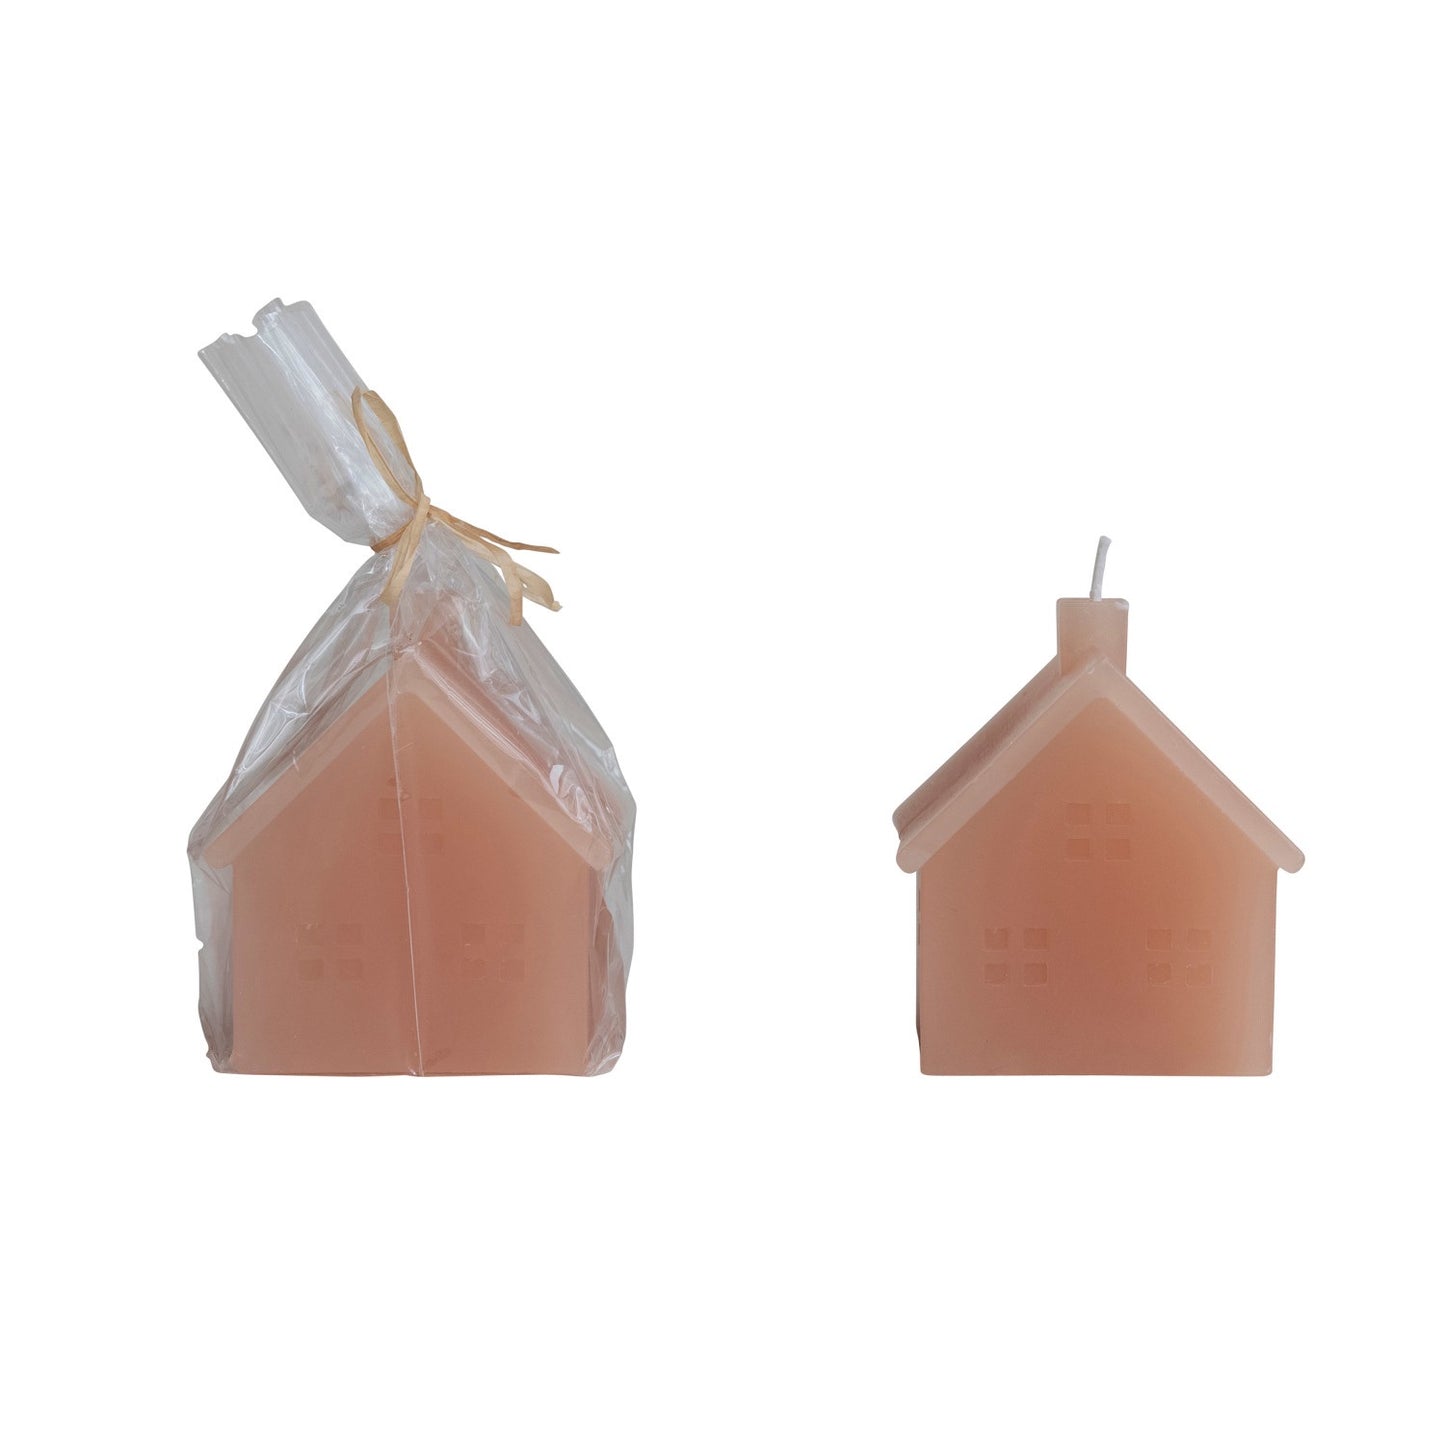 3-1/2"H Unscented House Shaped Candle, Apricot Color